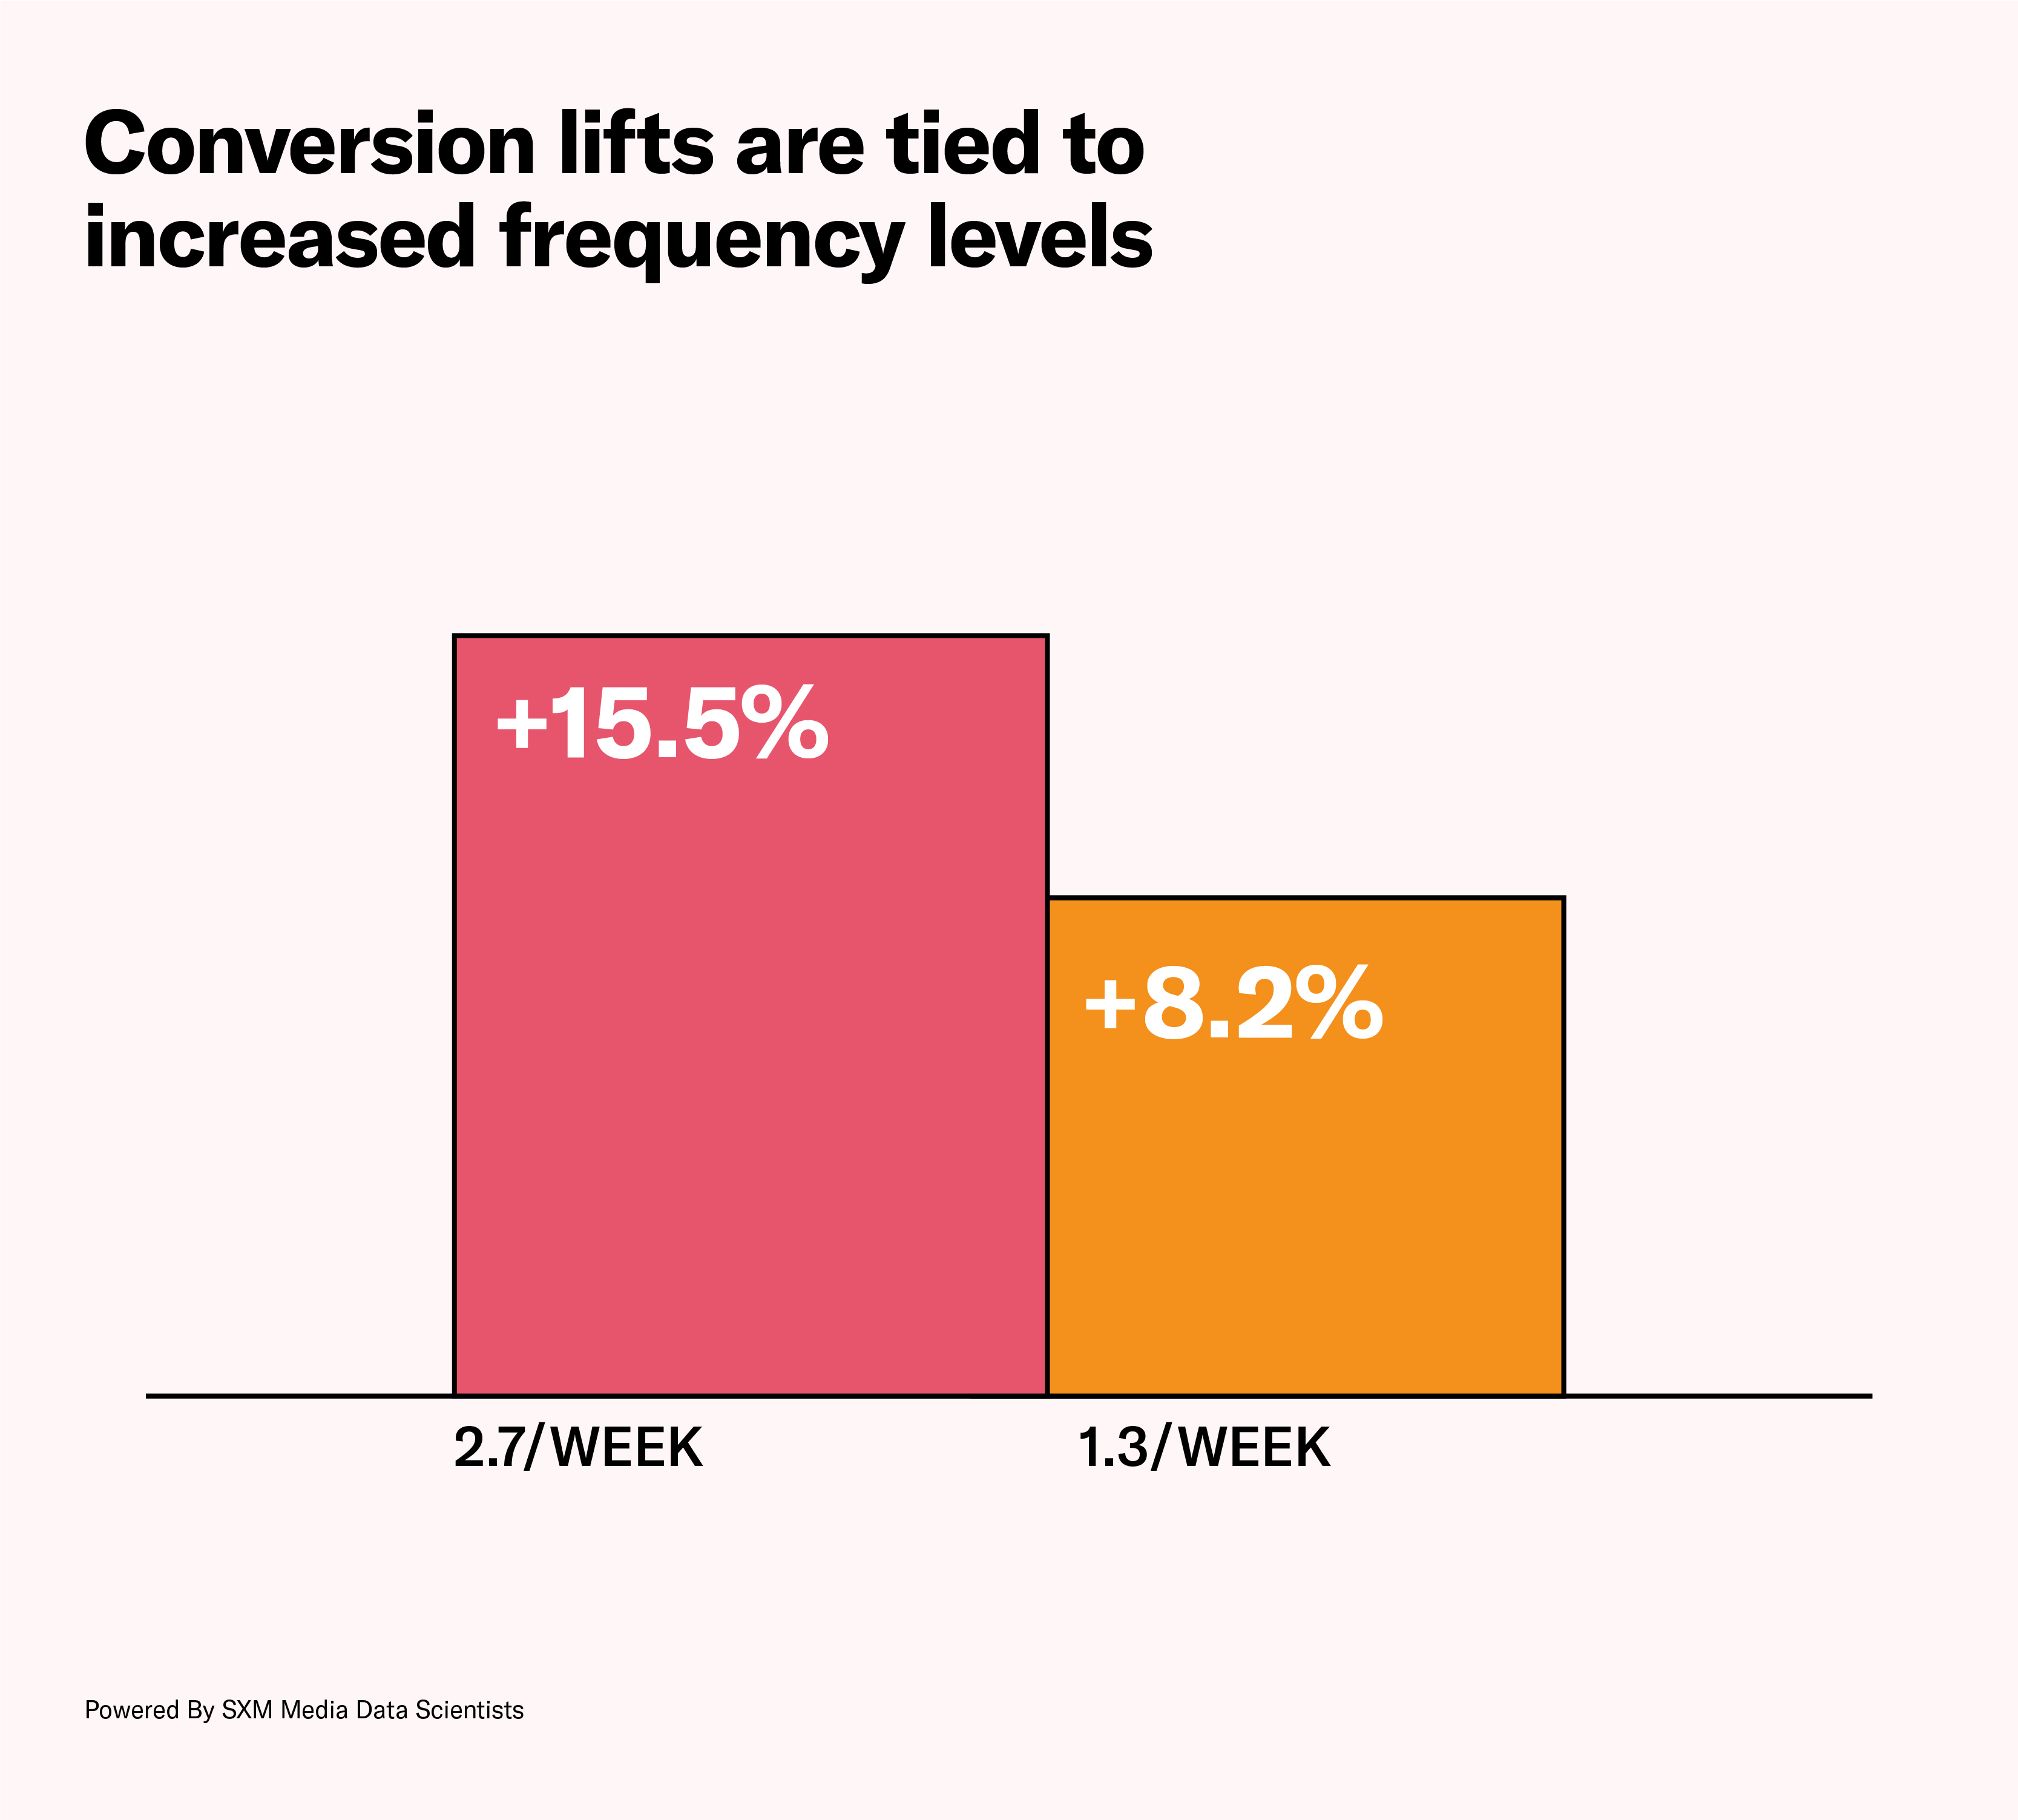 Conversion lifts are tied to increased frequency levels